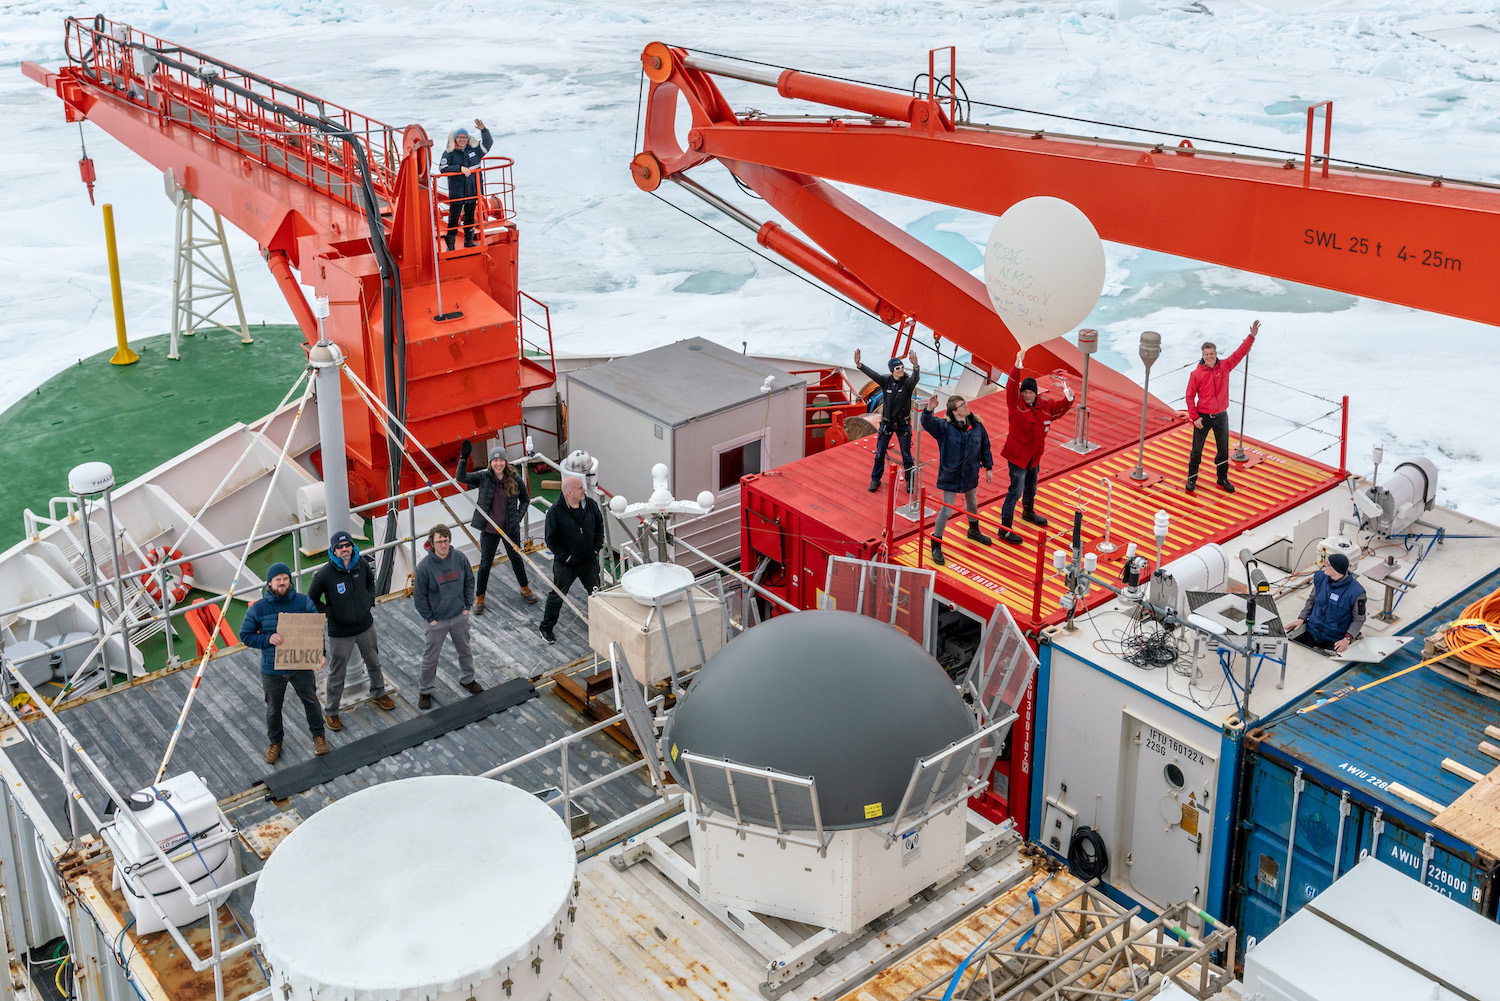 MOSAiC Atmosphere team members stand amid instruments and containers to wave from the bow of the Polarstern